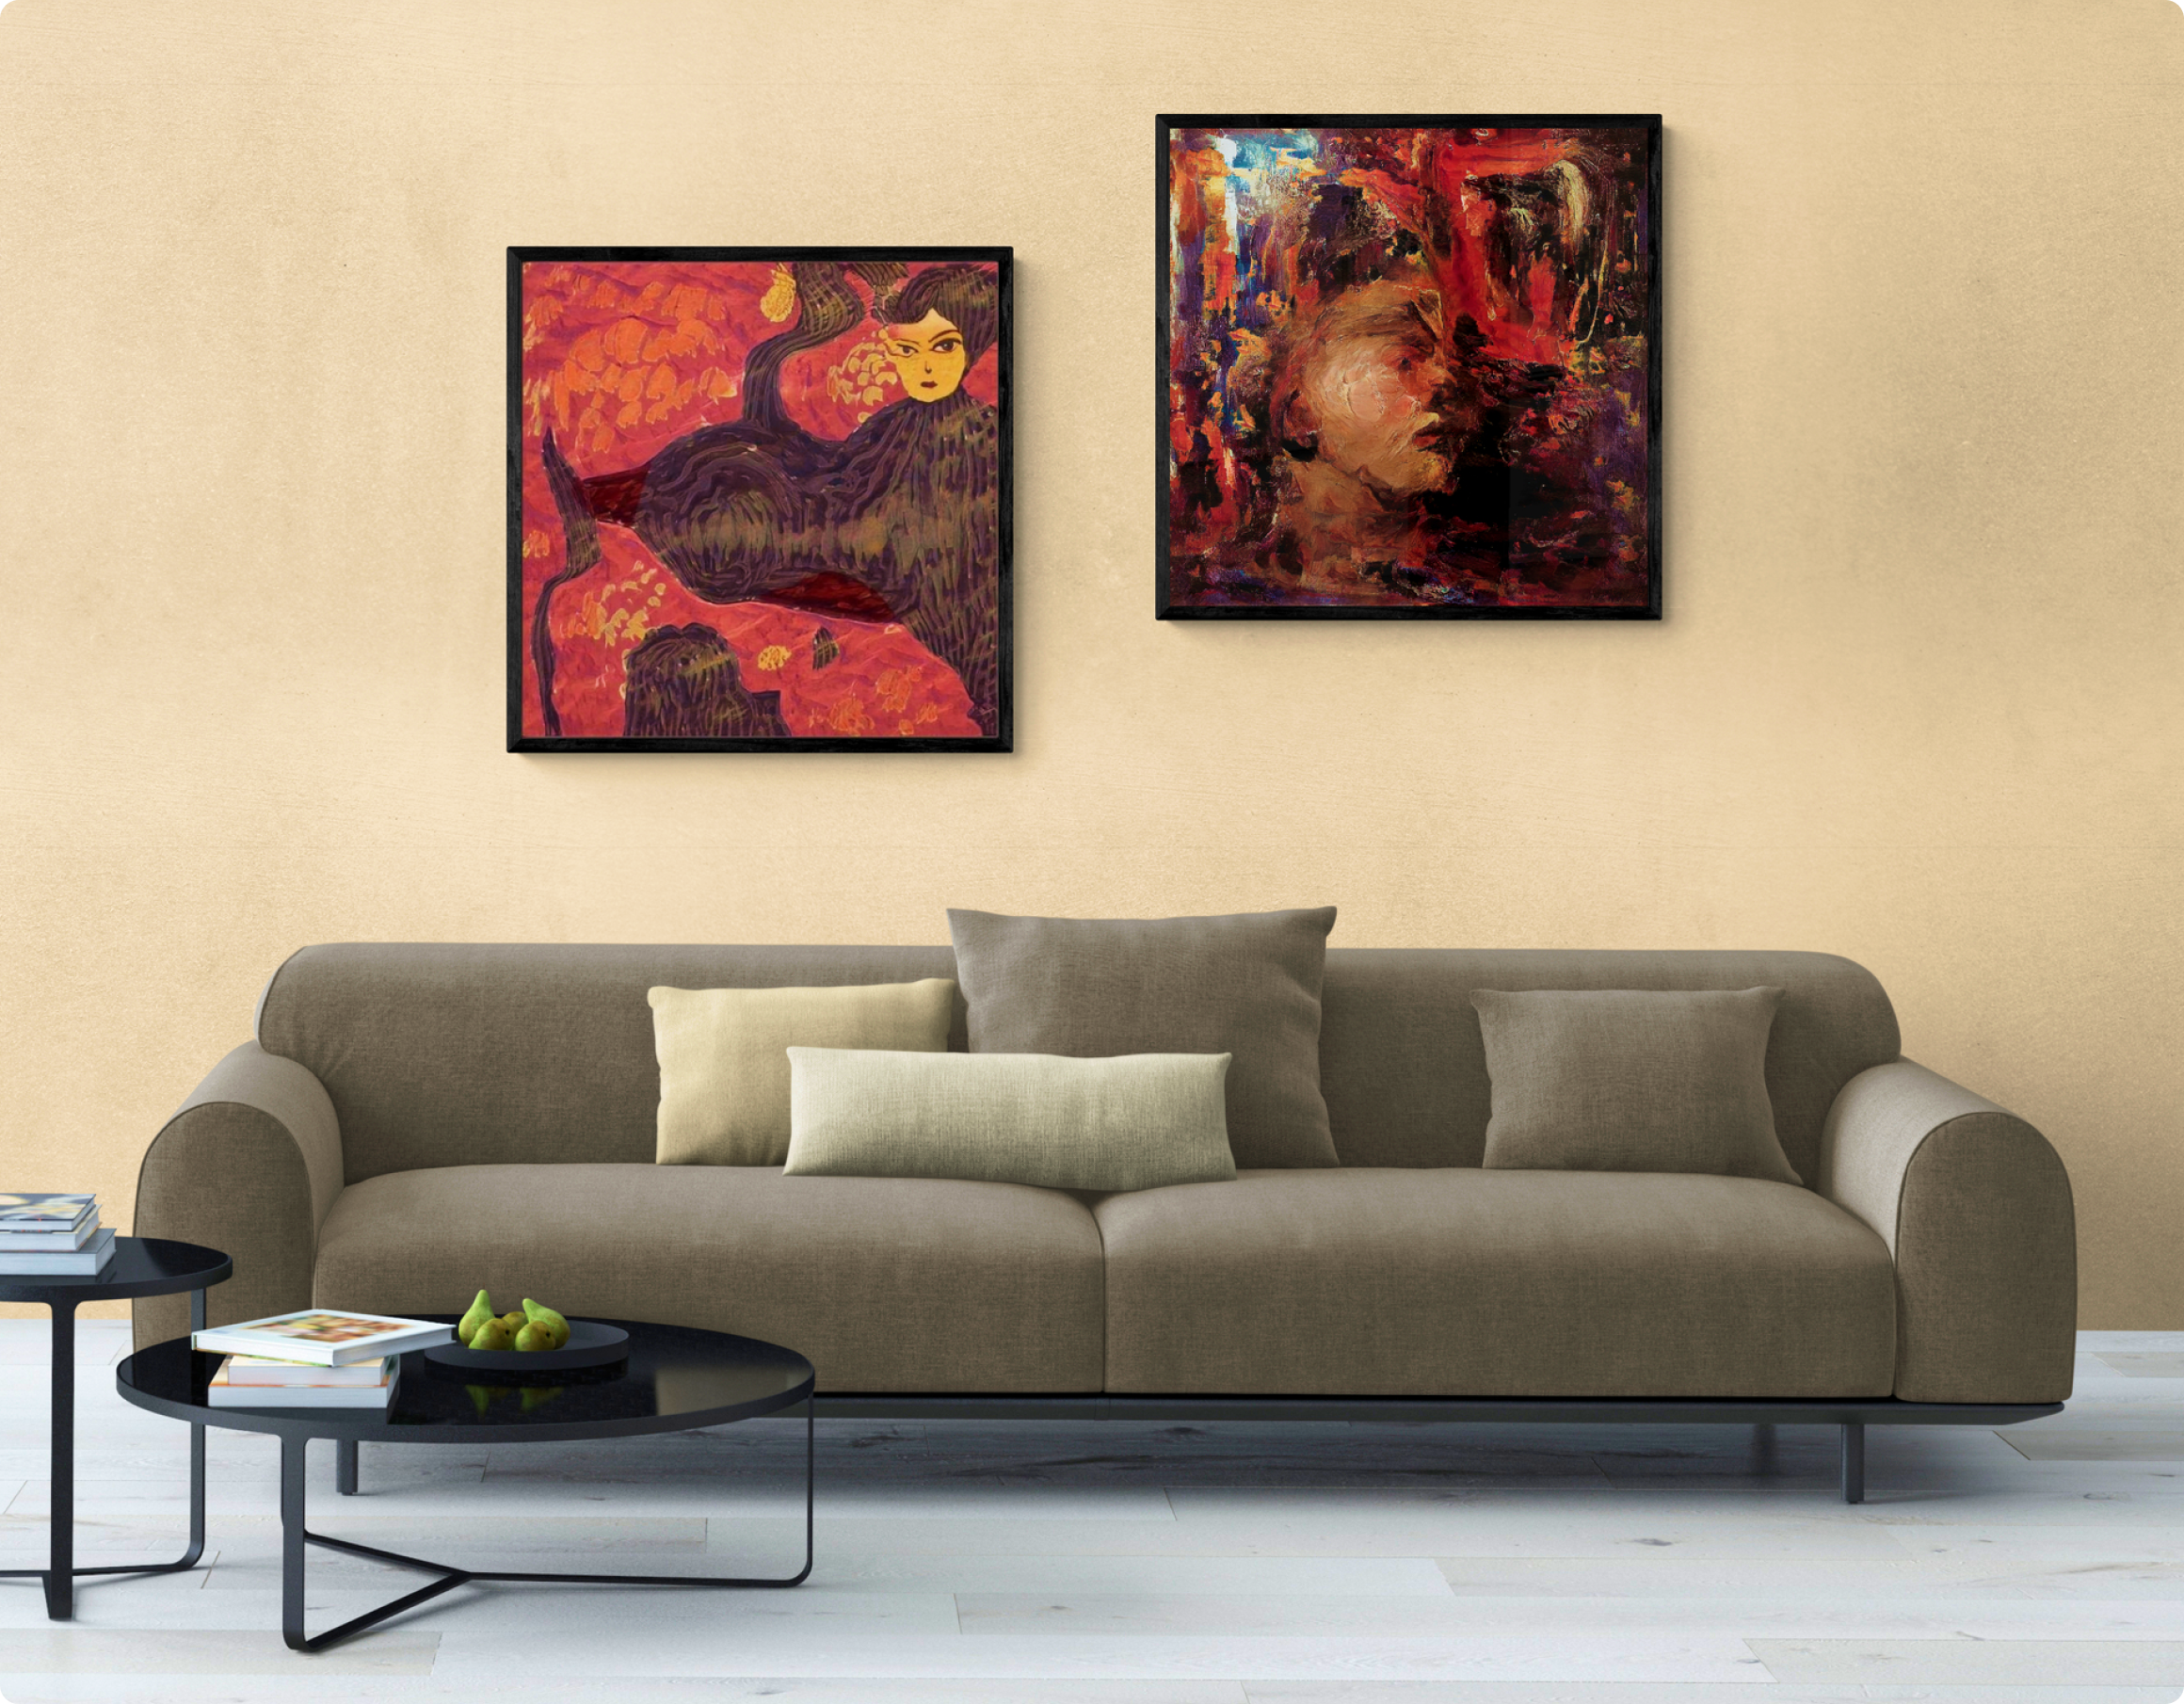 Our Art at your home